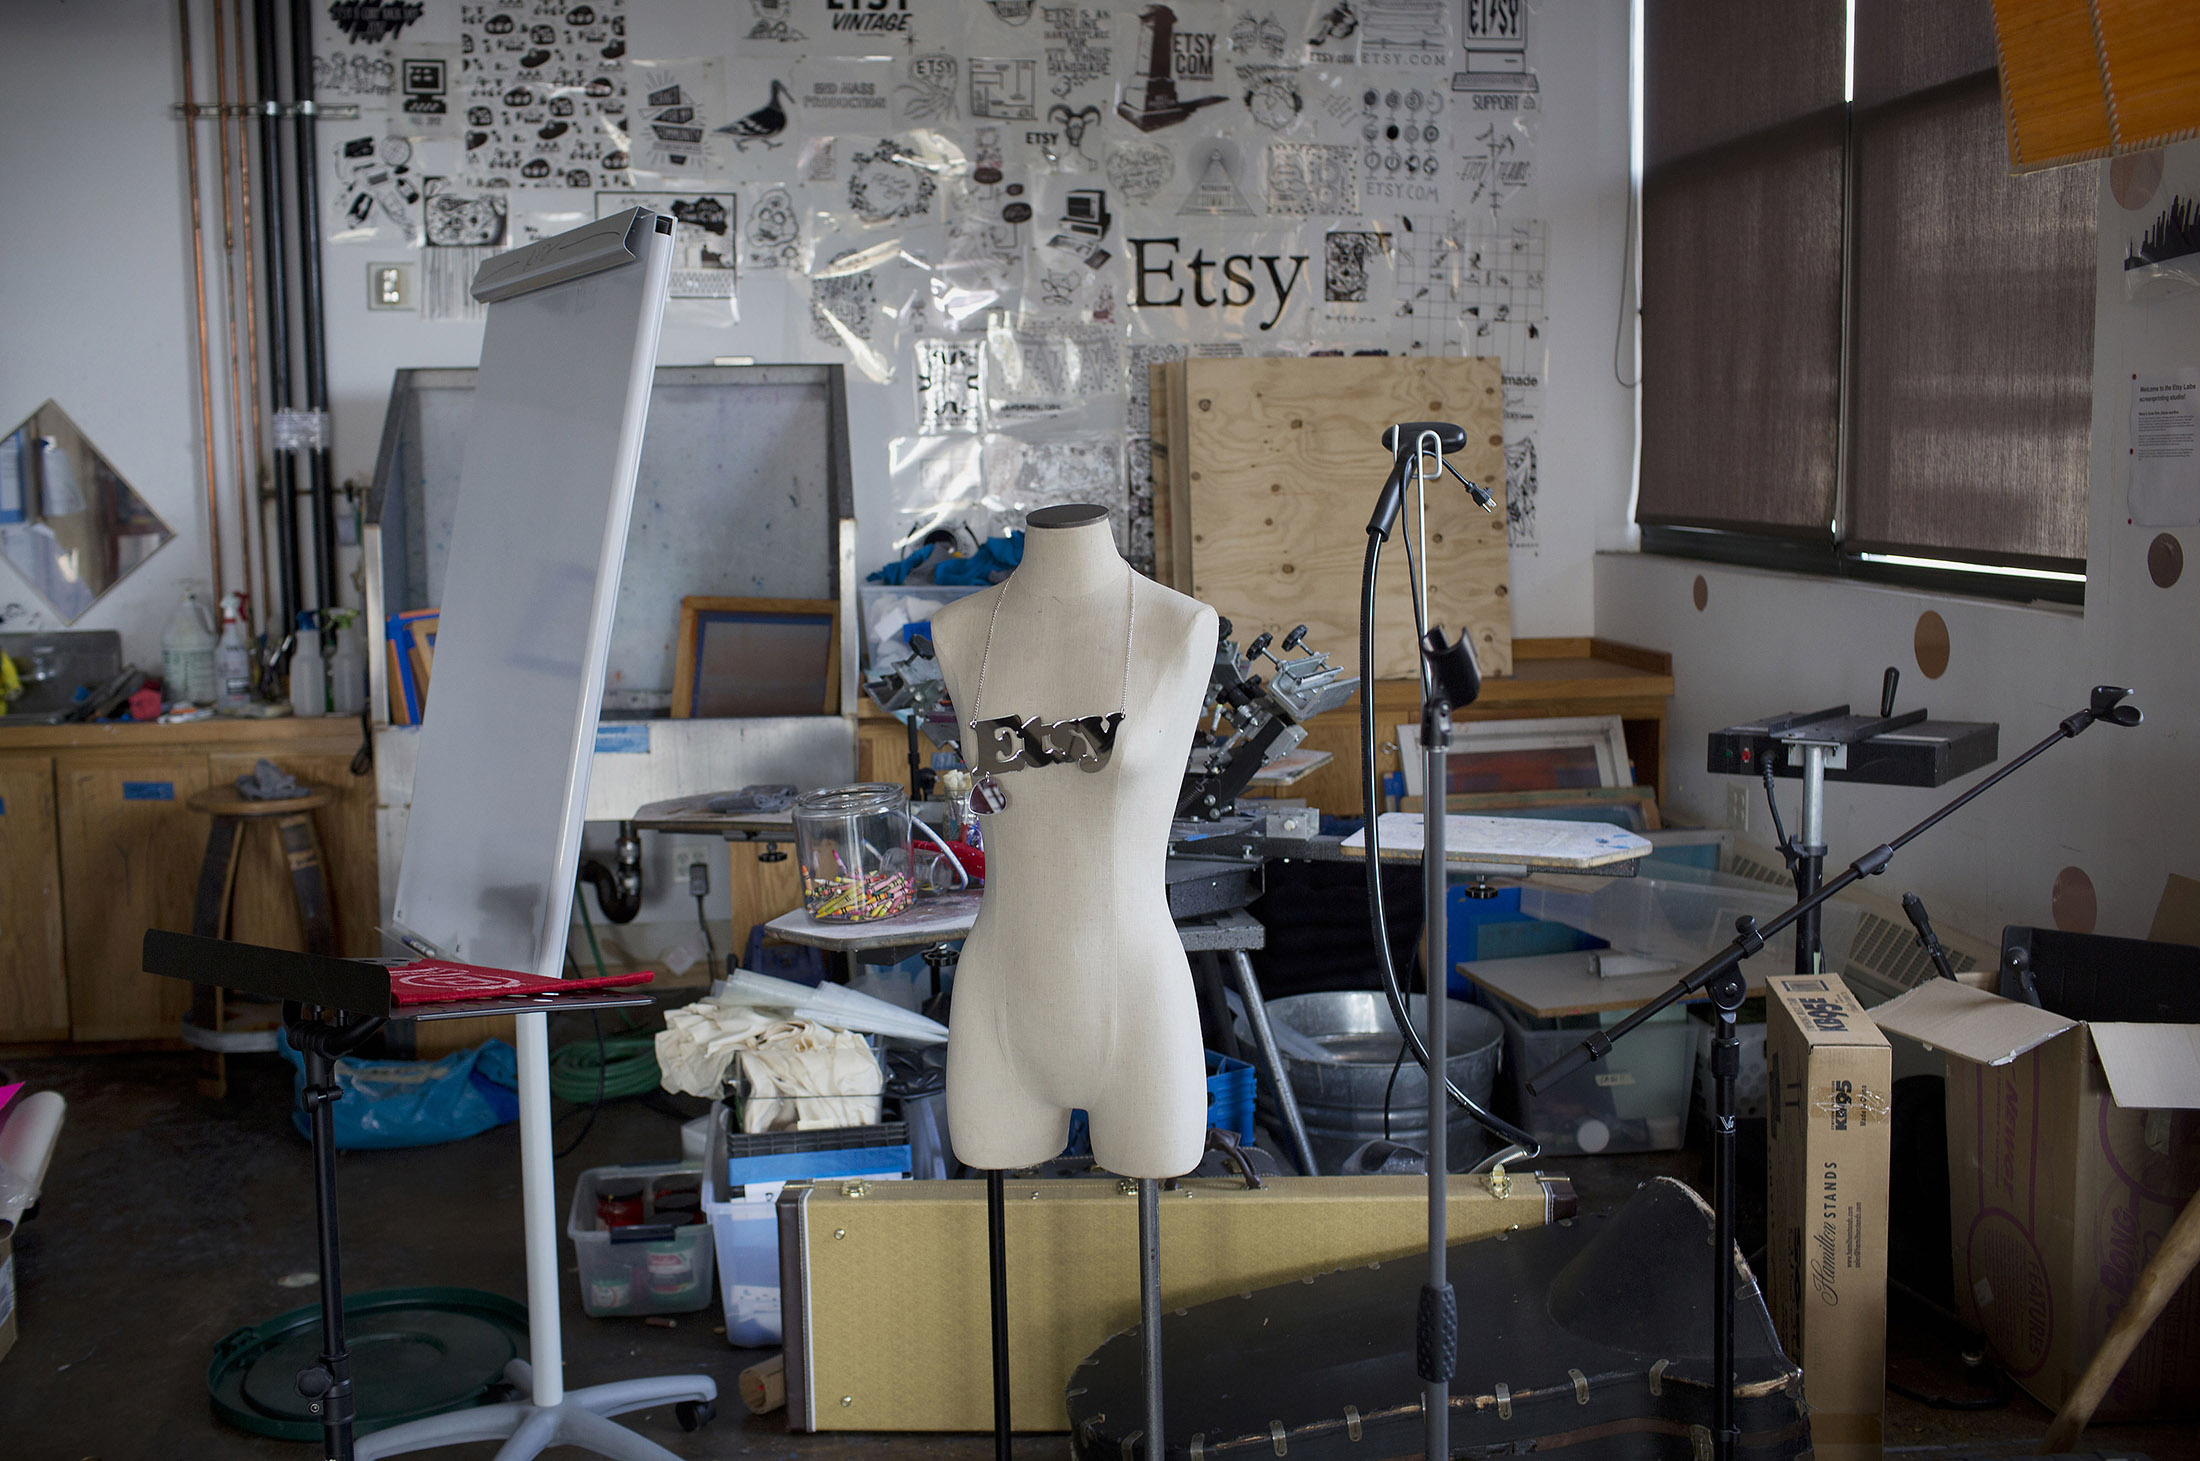 An Etsy necklace hangs on a mannequin in the craft lab at the company's headquarters in Brooklyn.
